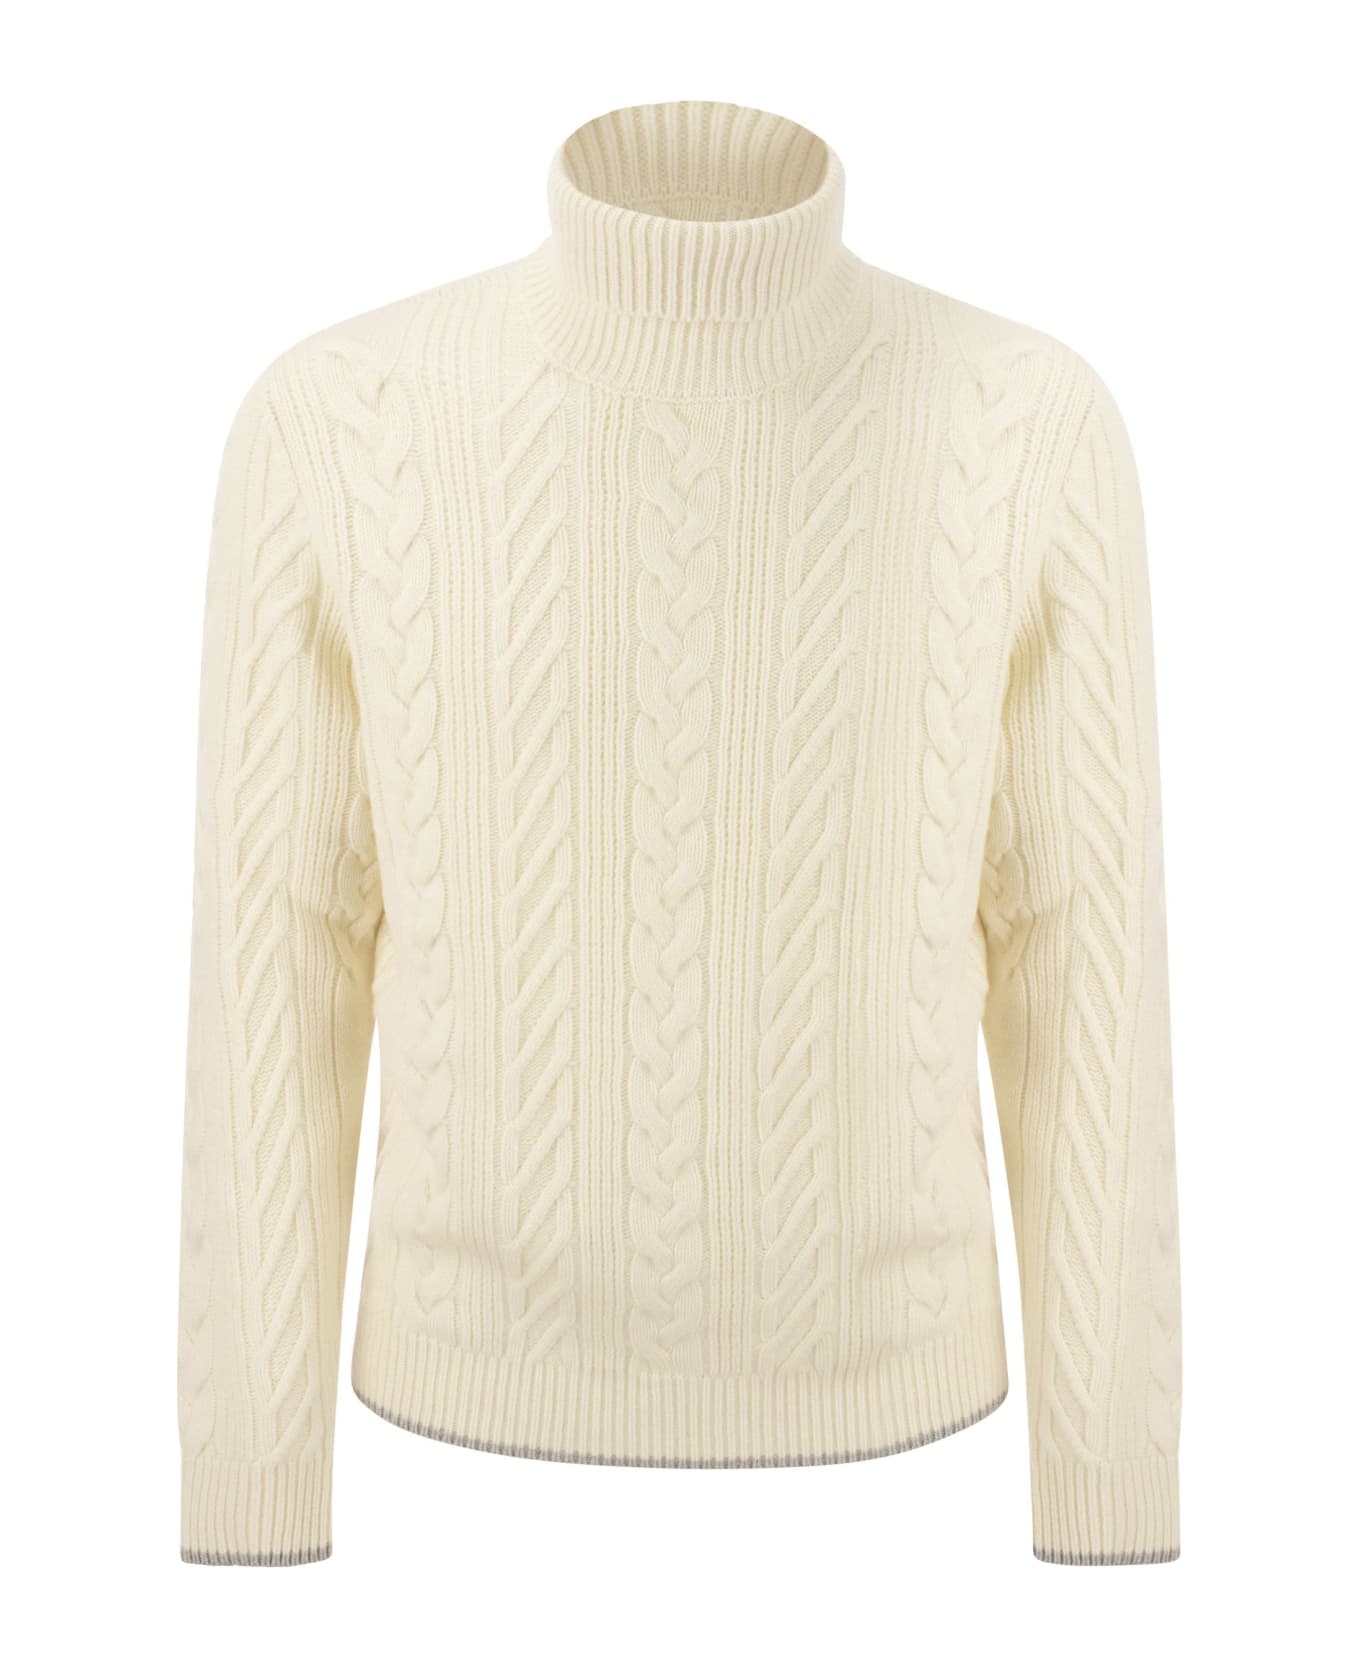 Peserico Wool And Cashmere Cable-knit Turtleneck Sweater - Cream ニットウェア